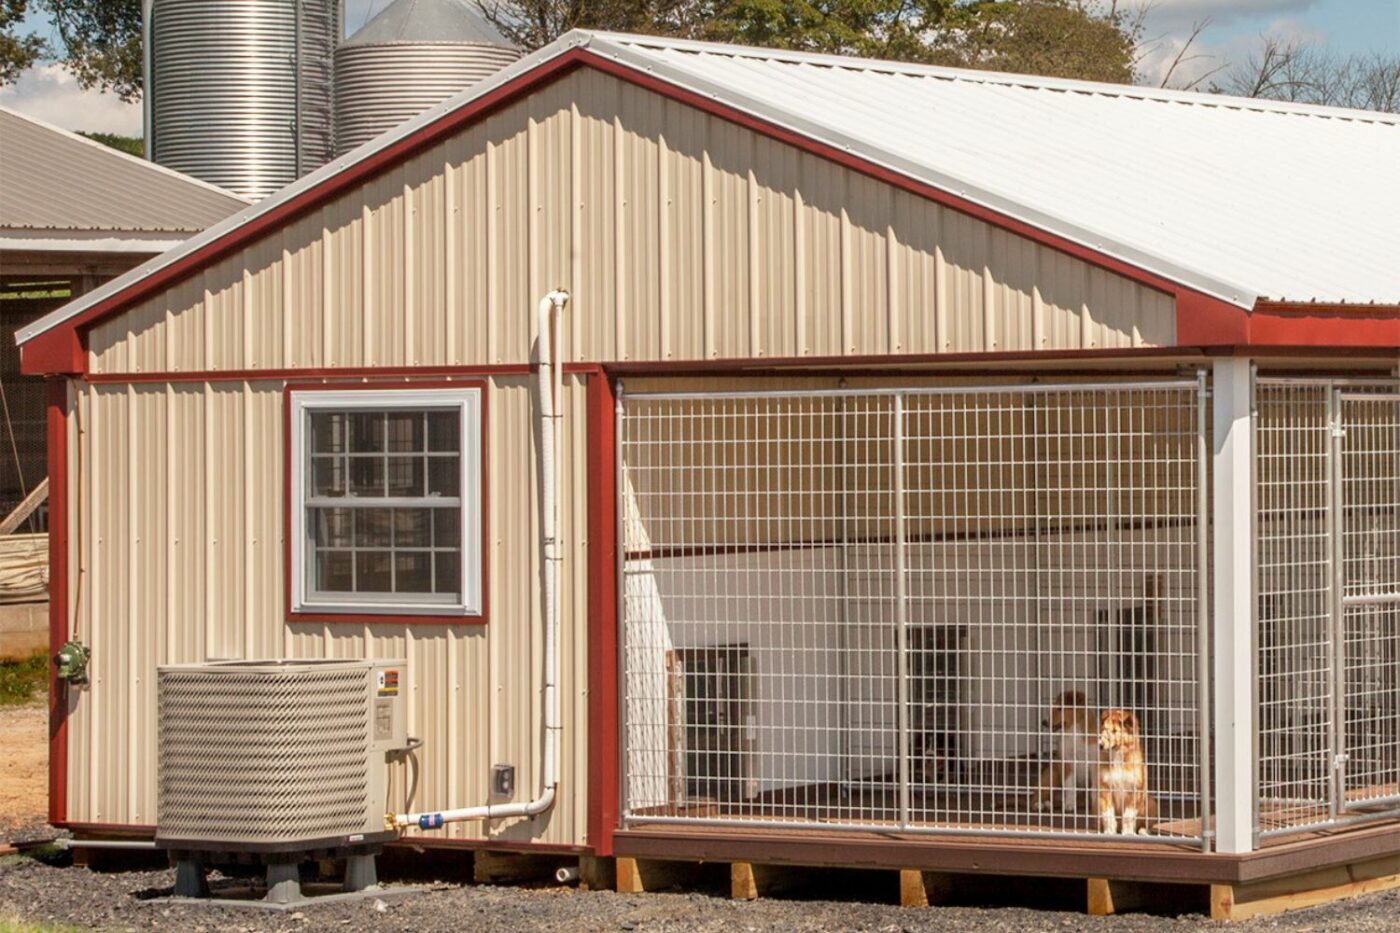 siding roofing and trim- dog kennel options